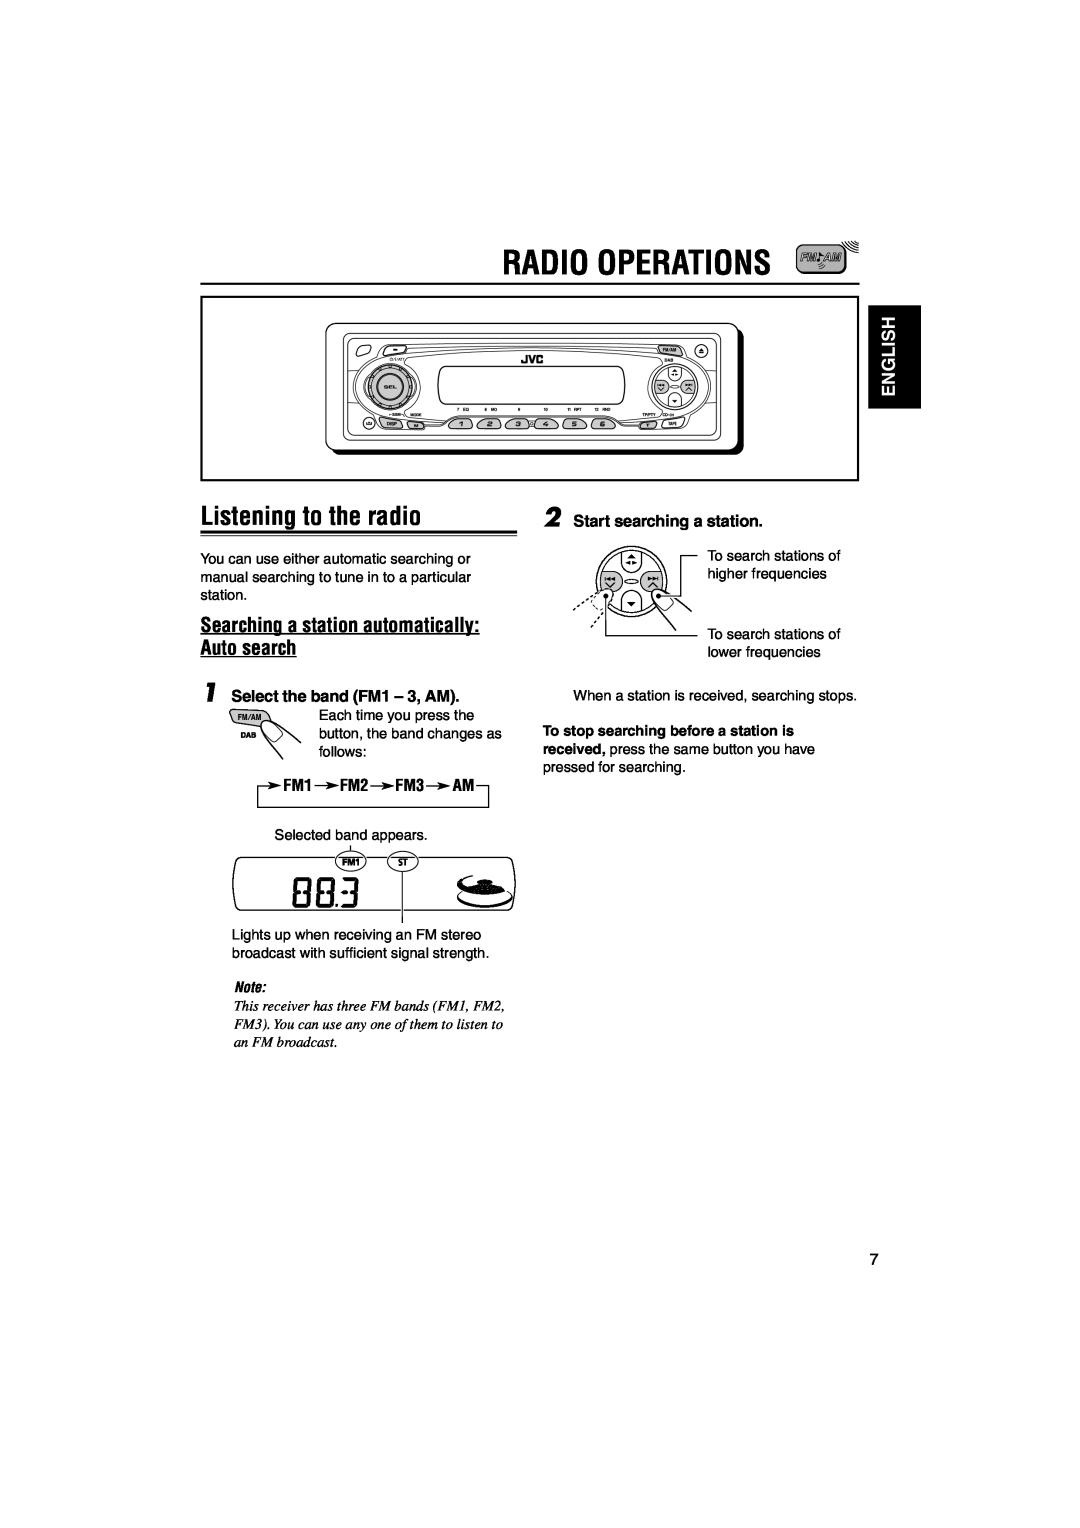 JVC KS-FX842R manual Radio Operations, Listening to the radio, Searching a station automatically Auto search, English 